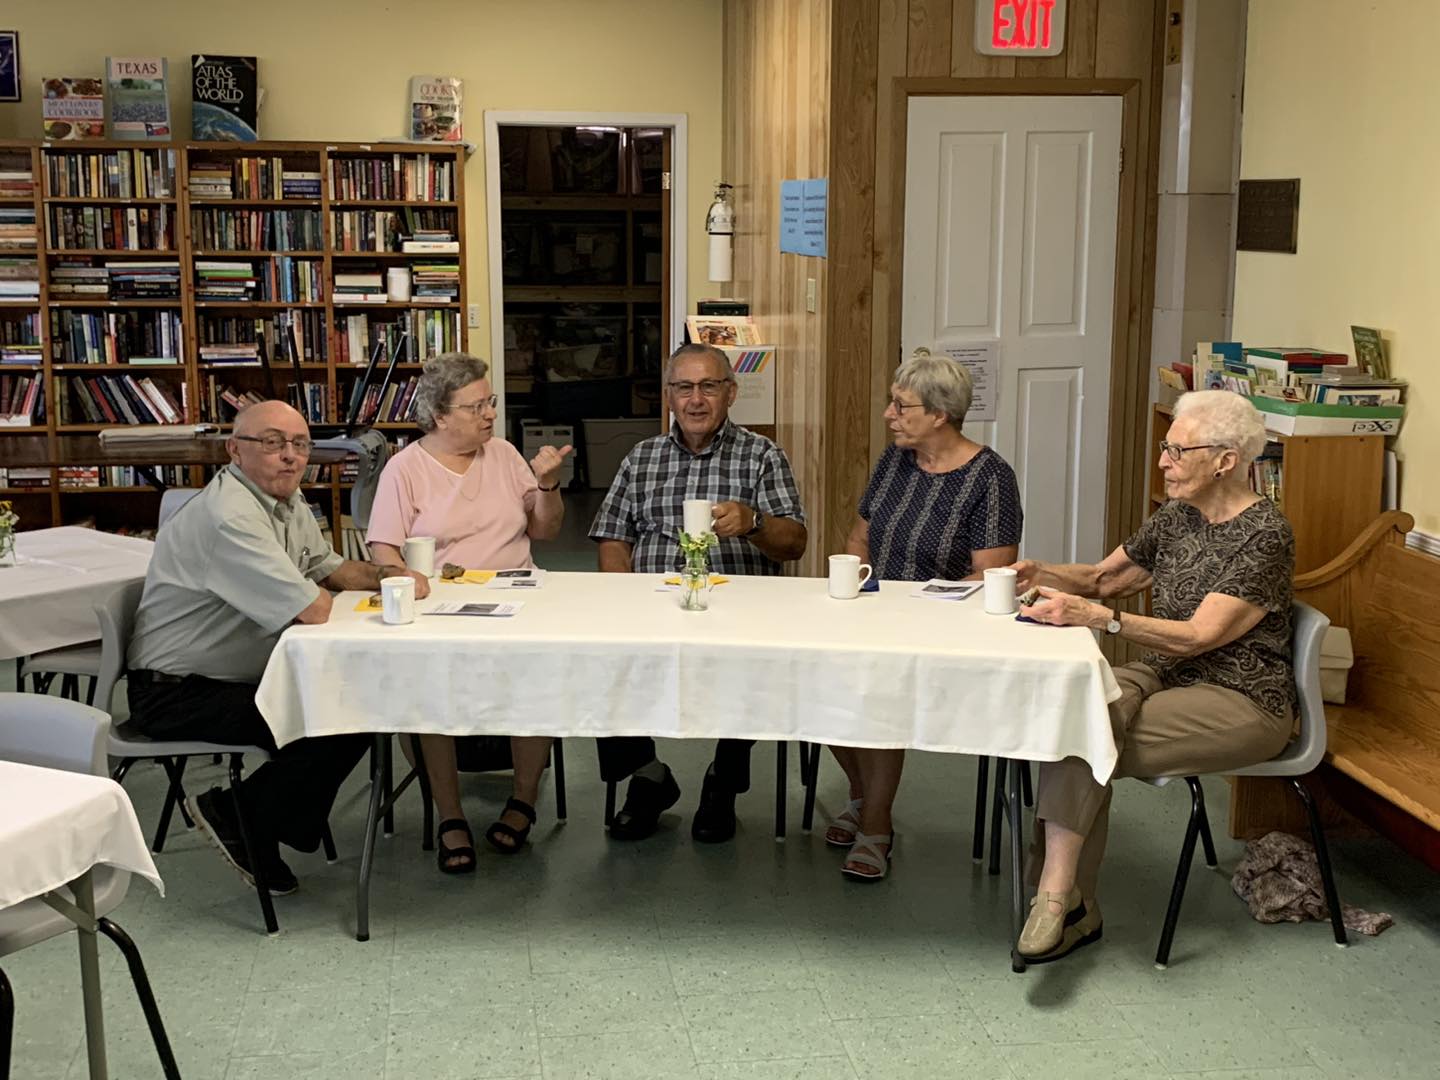 Our first Cafe Church was held in St. Luke's Parish Hall on Sunday, July 23rd. It was great to see so many people.